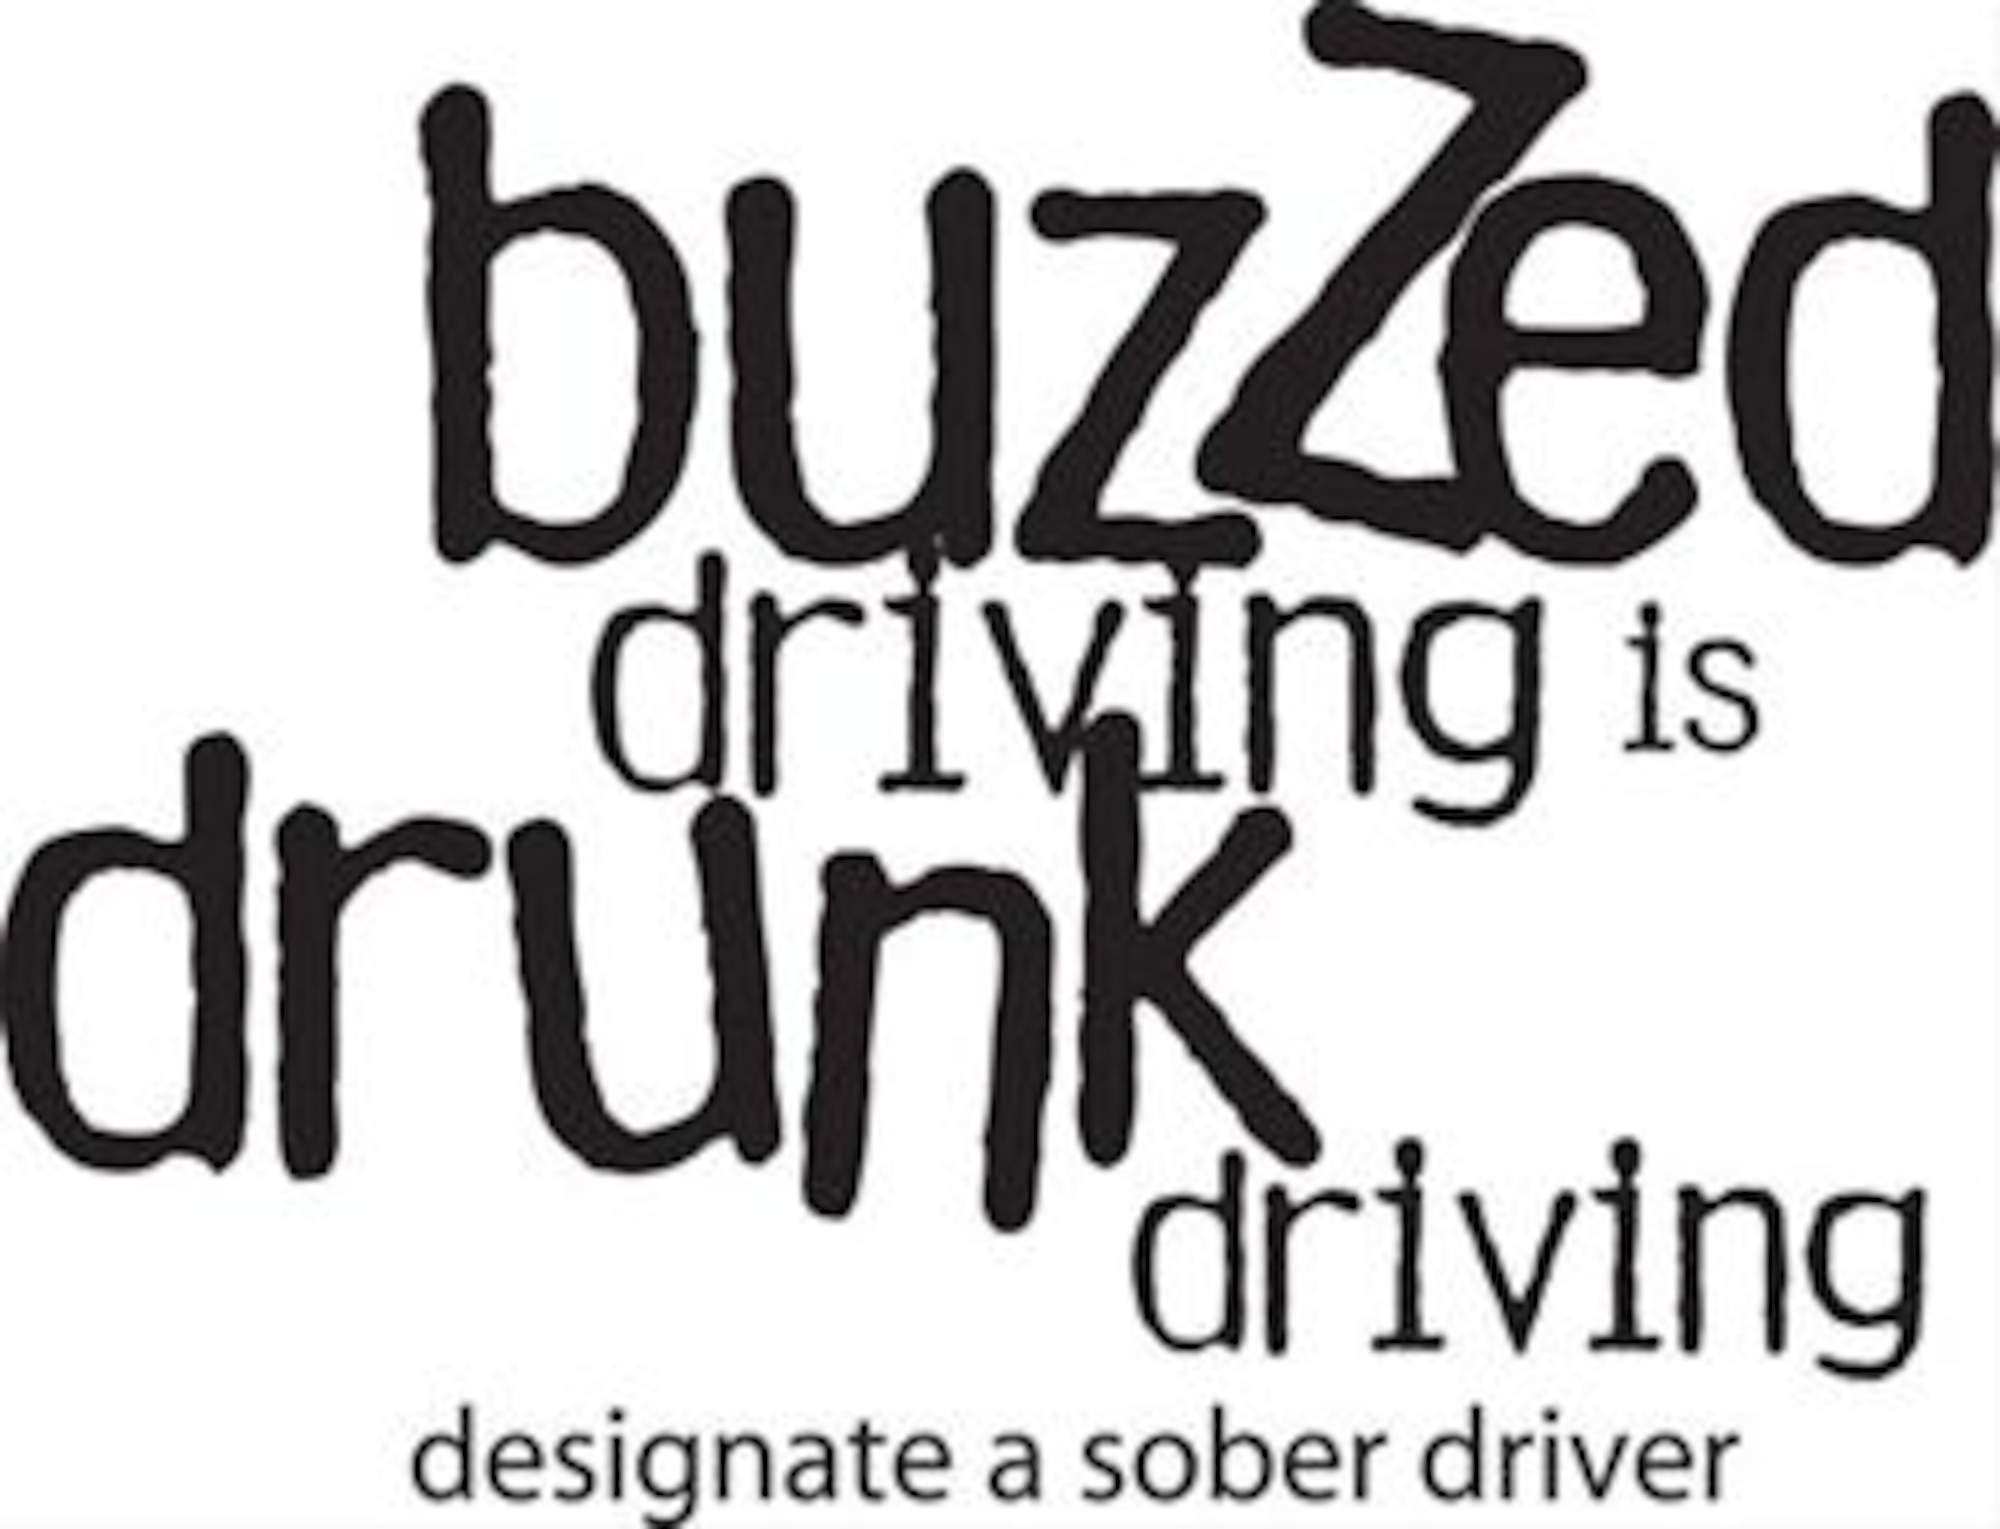 Stay safe and drive sober for the holidays